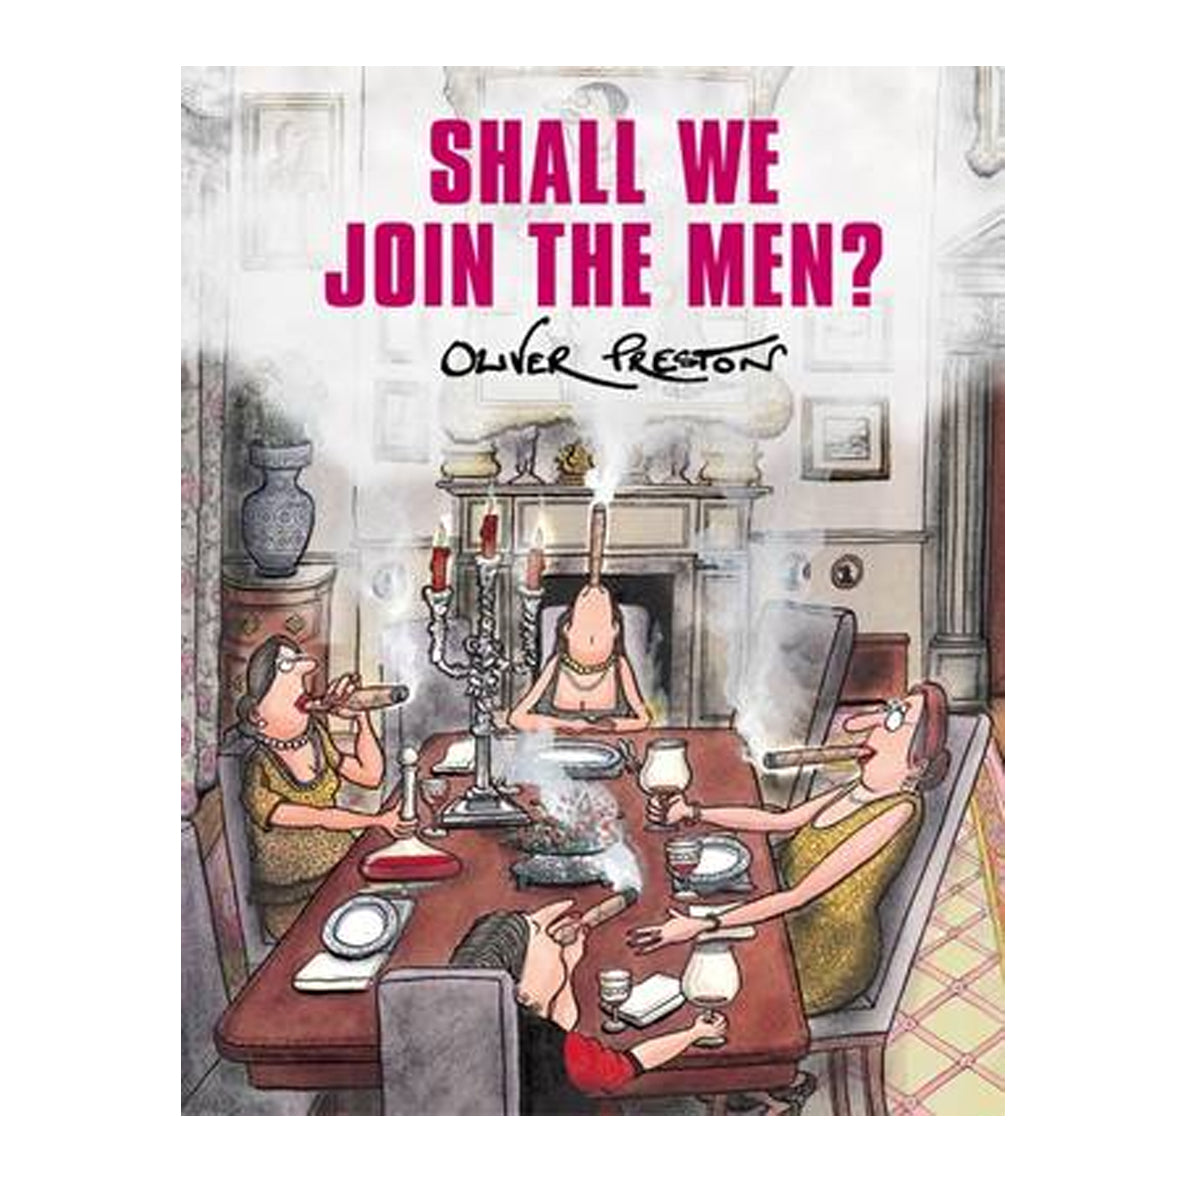 Book - Shall We Join the Men